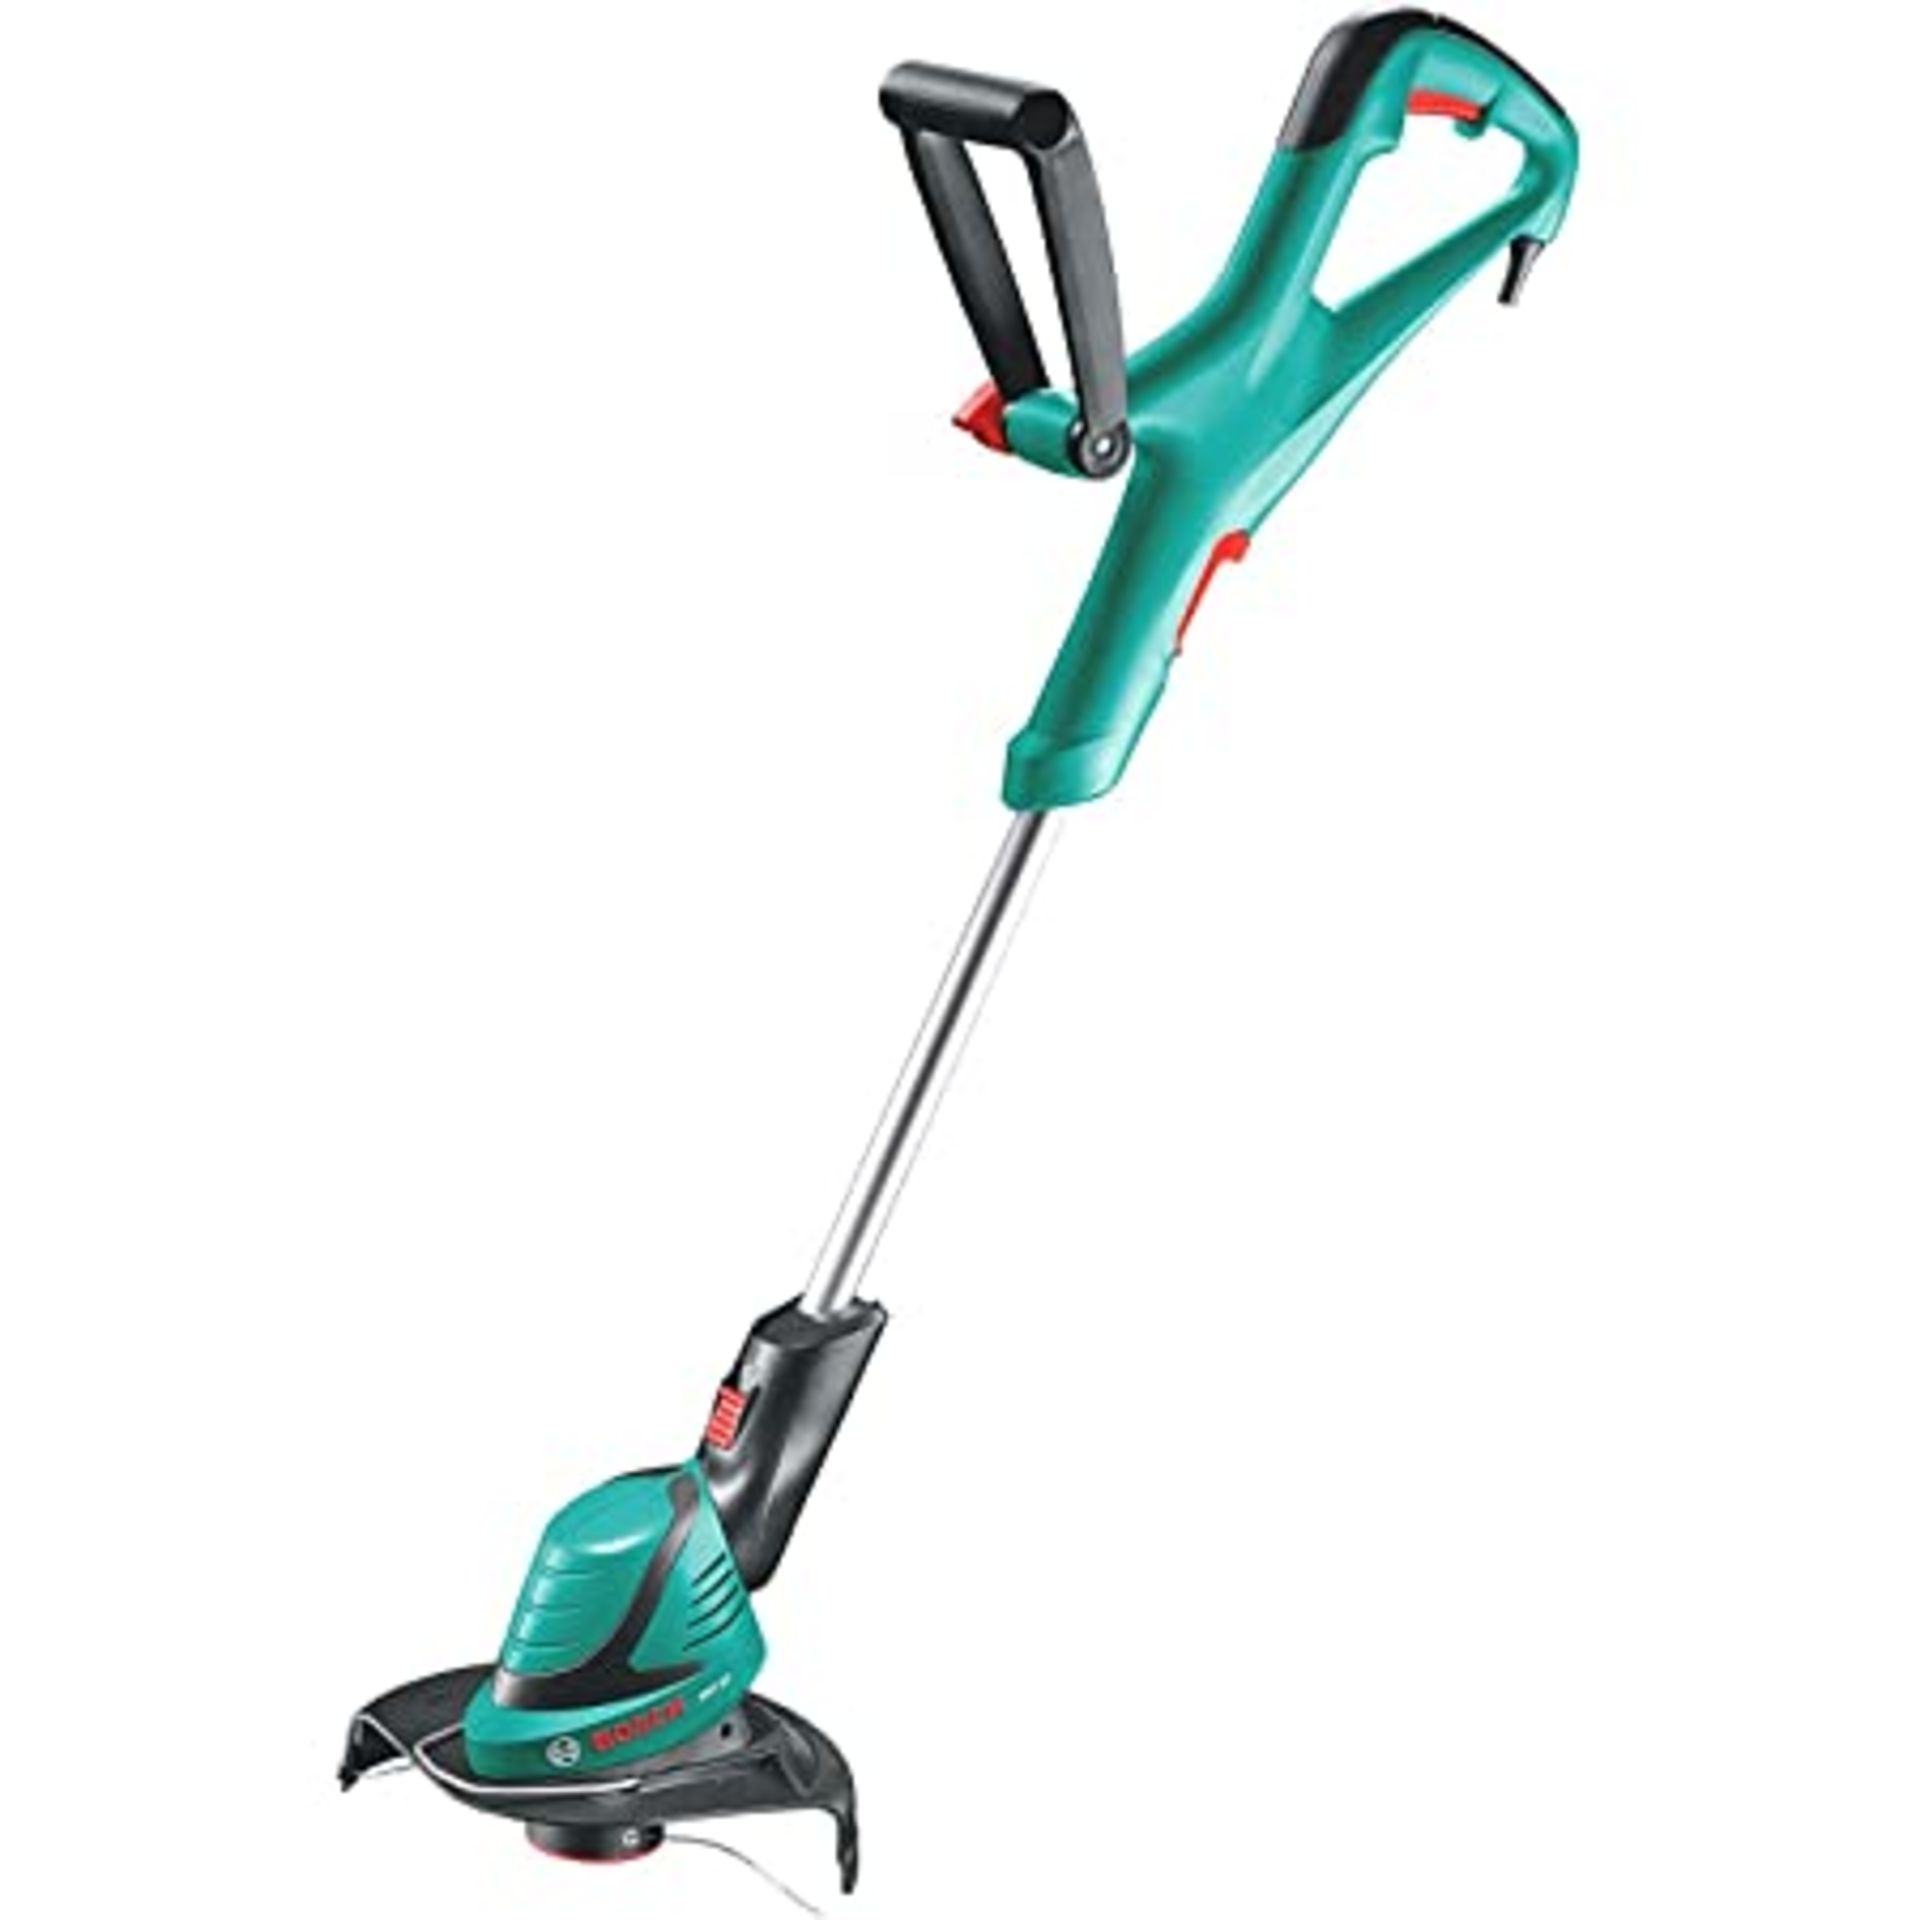 BOSCH ART 27 GRASS TRIMMER Â£52.82Condition ReportAppraisal Available on Request- All Items are